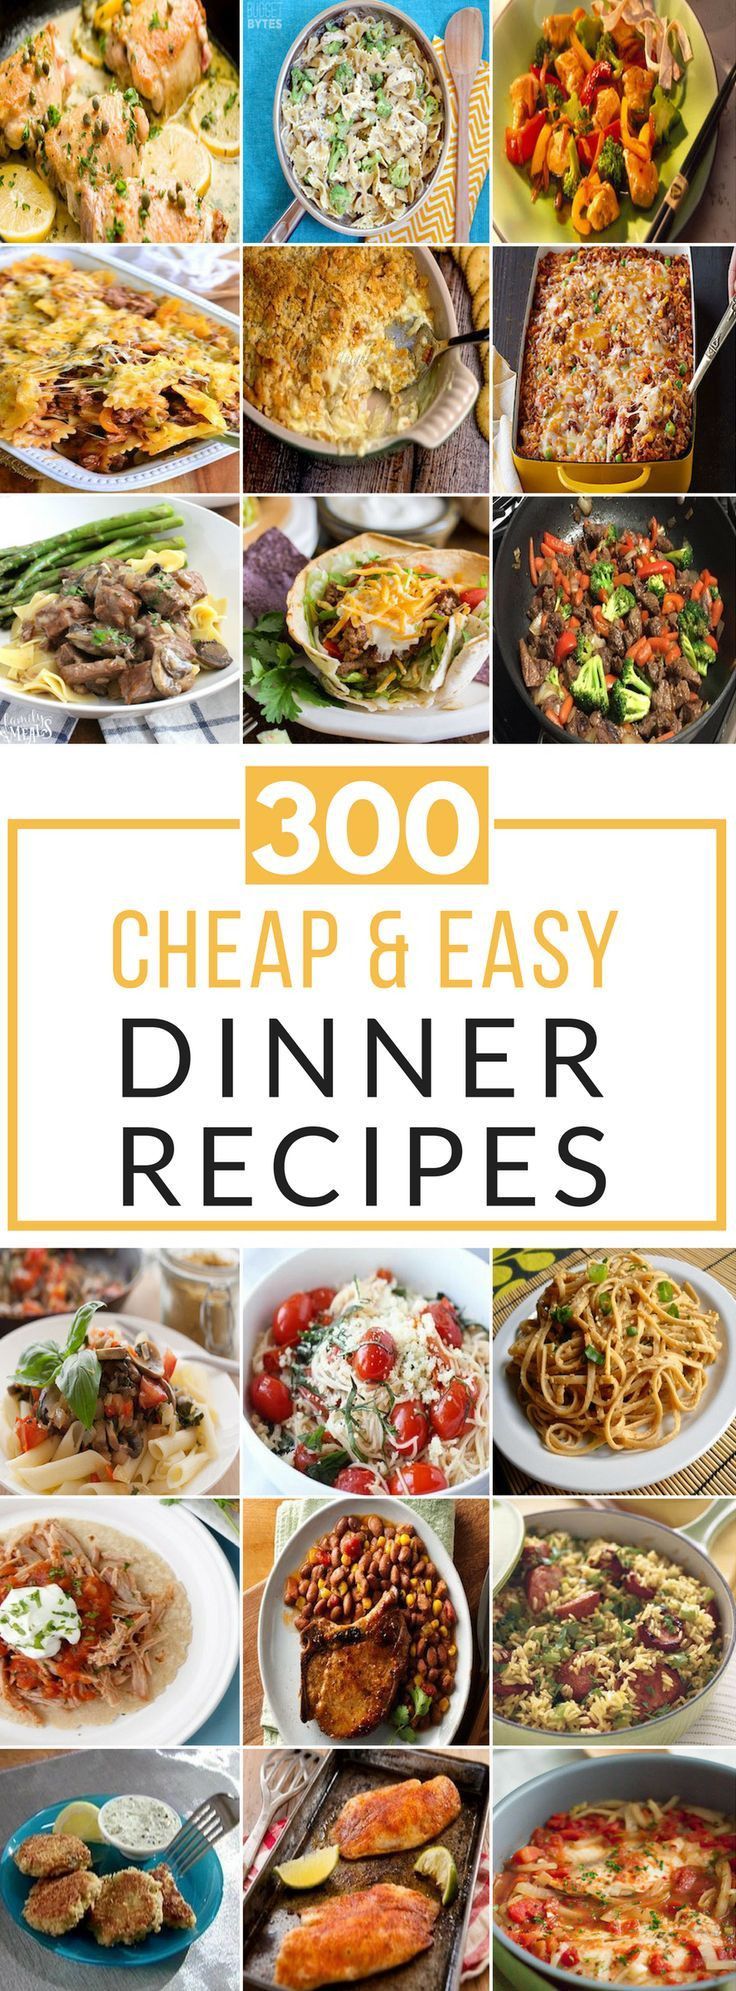 Quick Cheap Dinner Ideas
 306 best images about Cheap and Quick Recipes on Pinterest